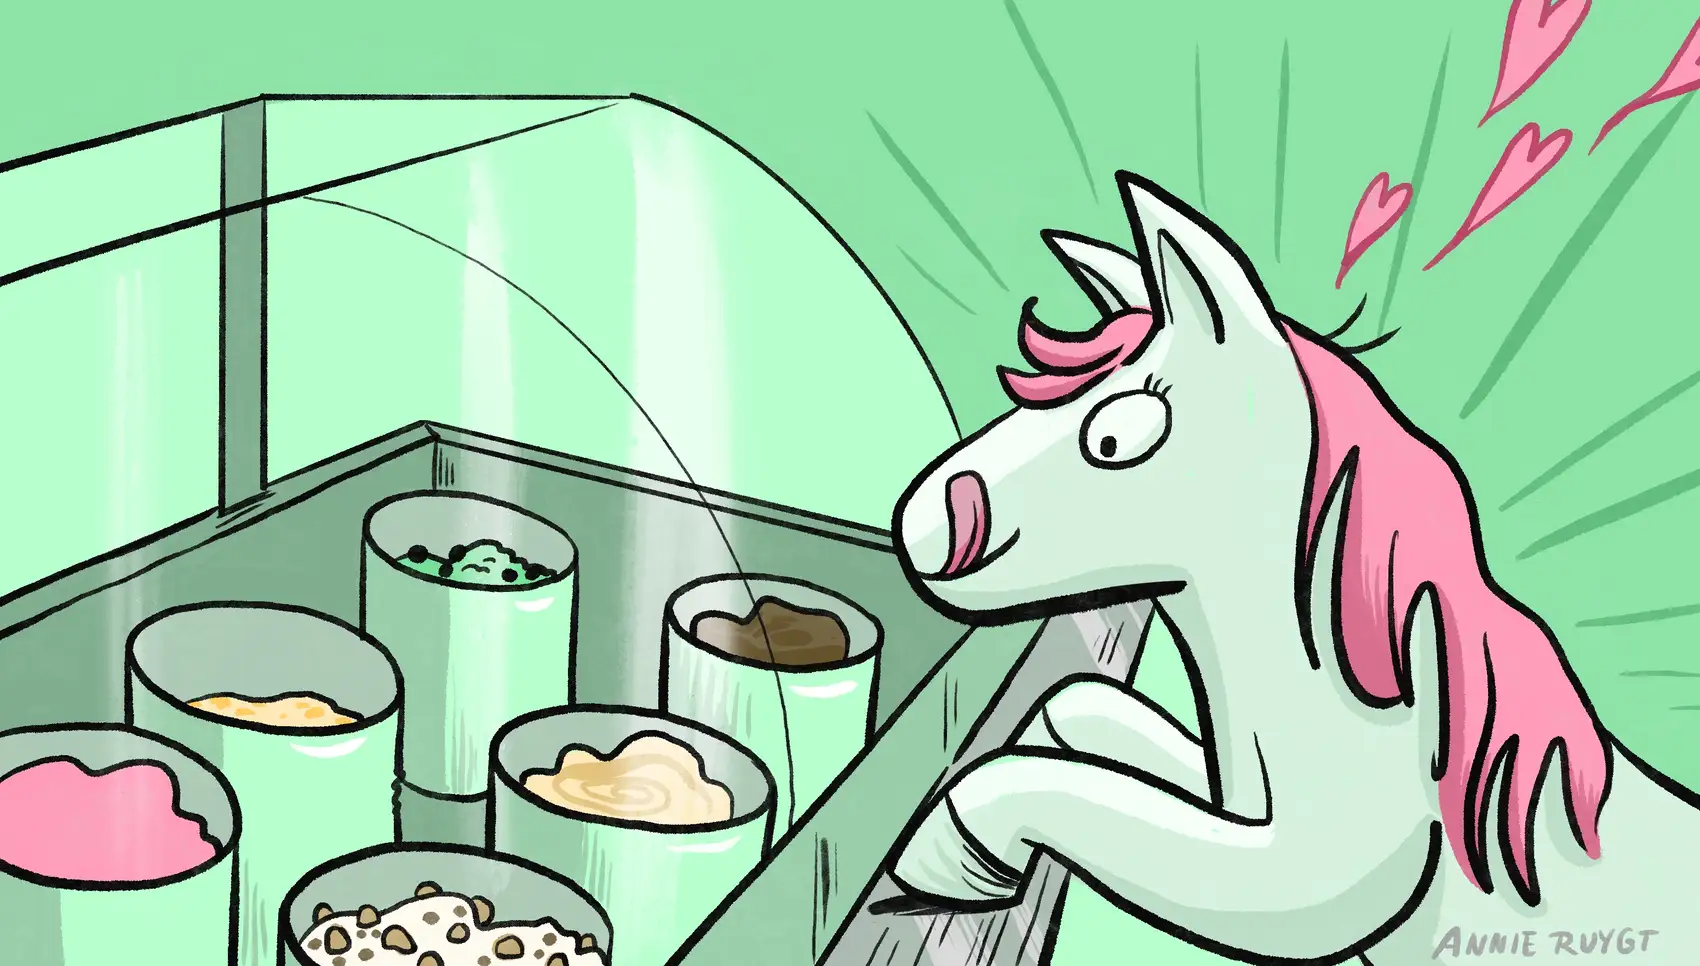 A pony with its tongue sticking out chooses as ice cream flavor from a glass display counter containing 6 buckets of ice cream.